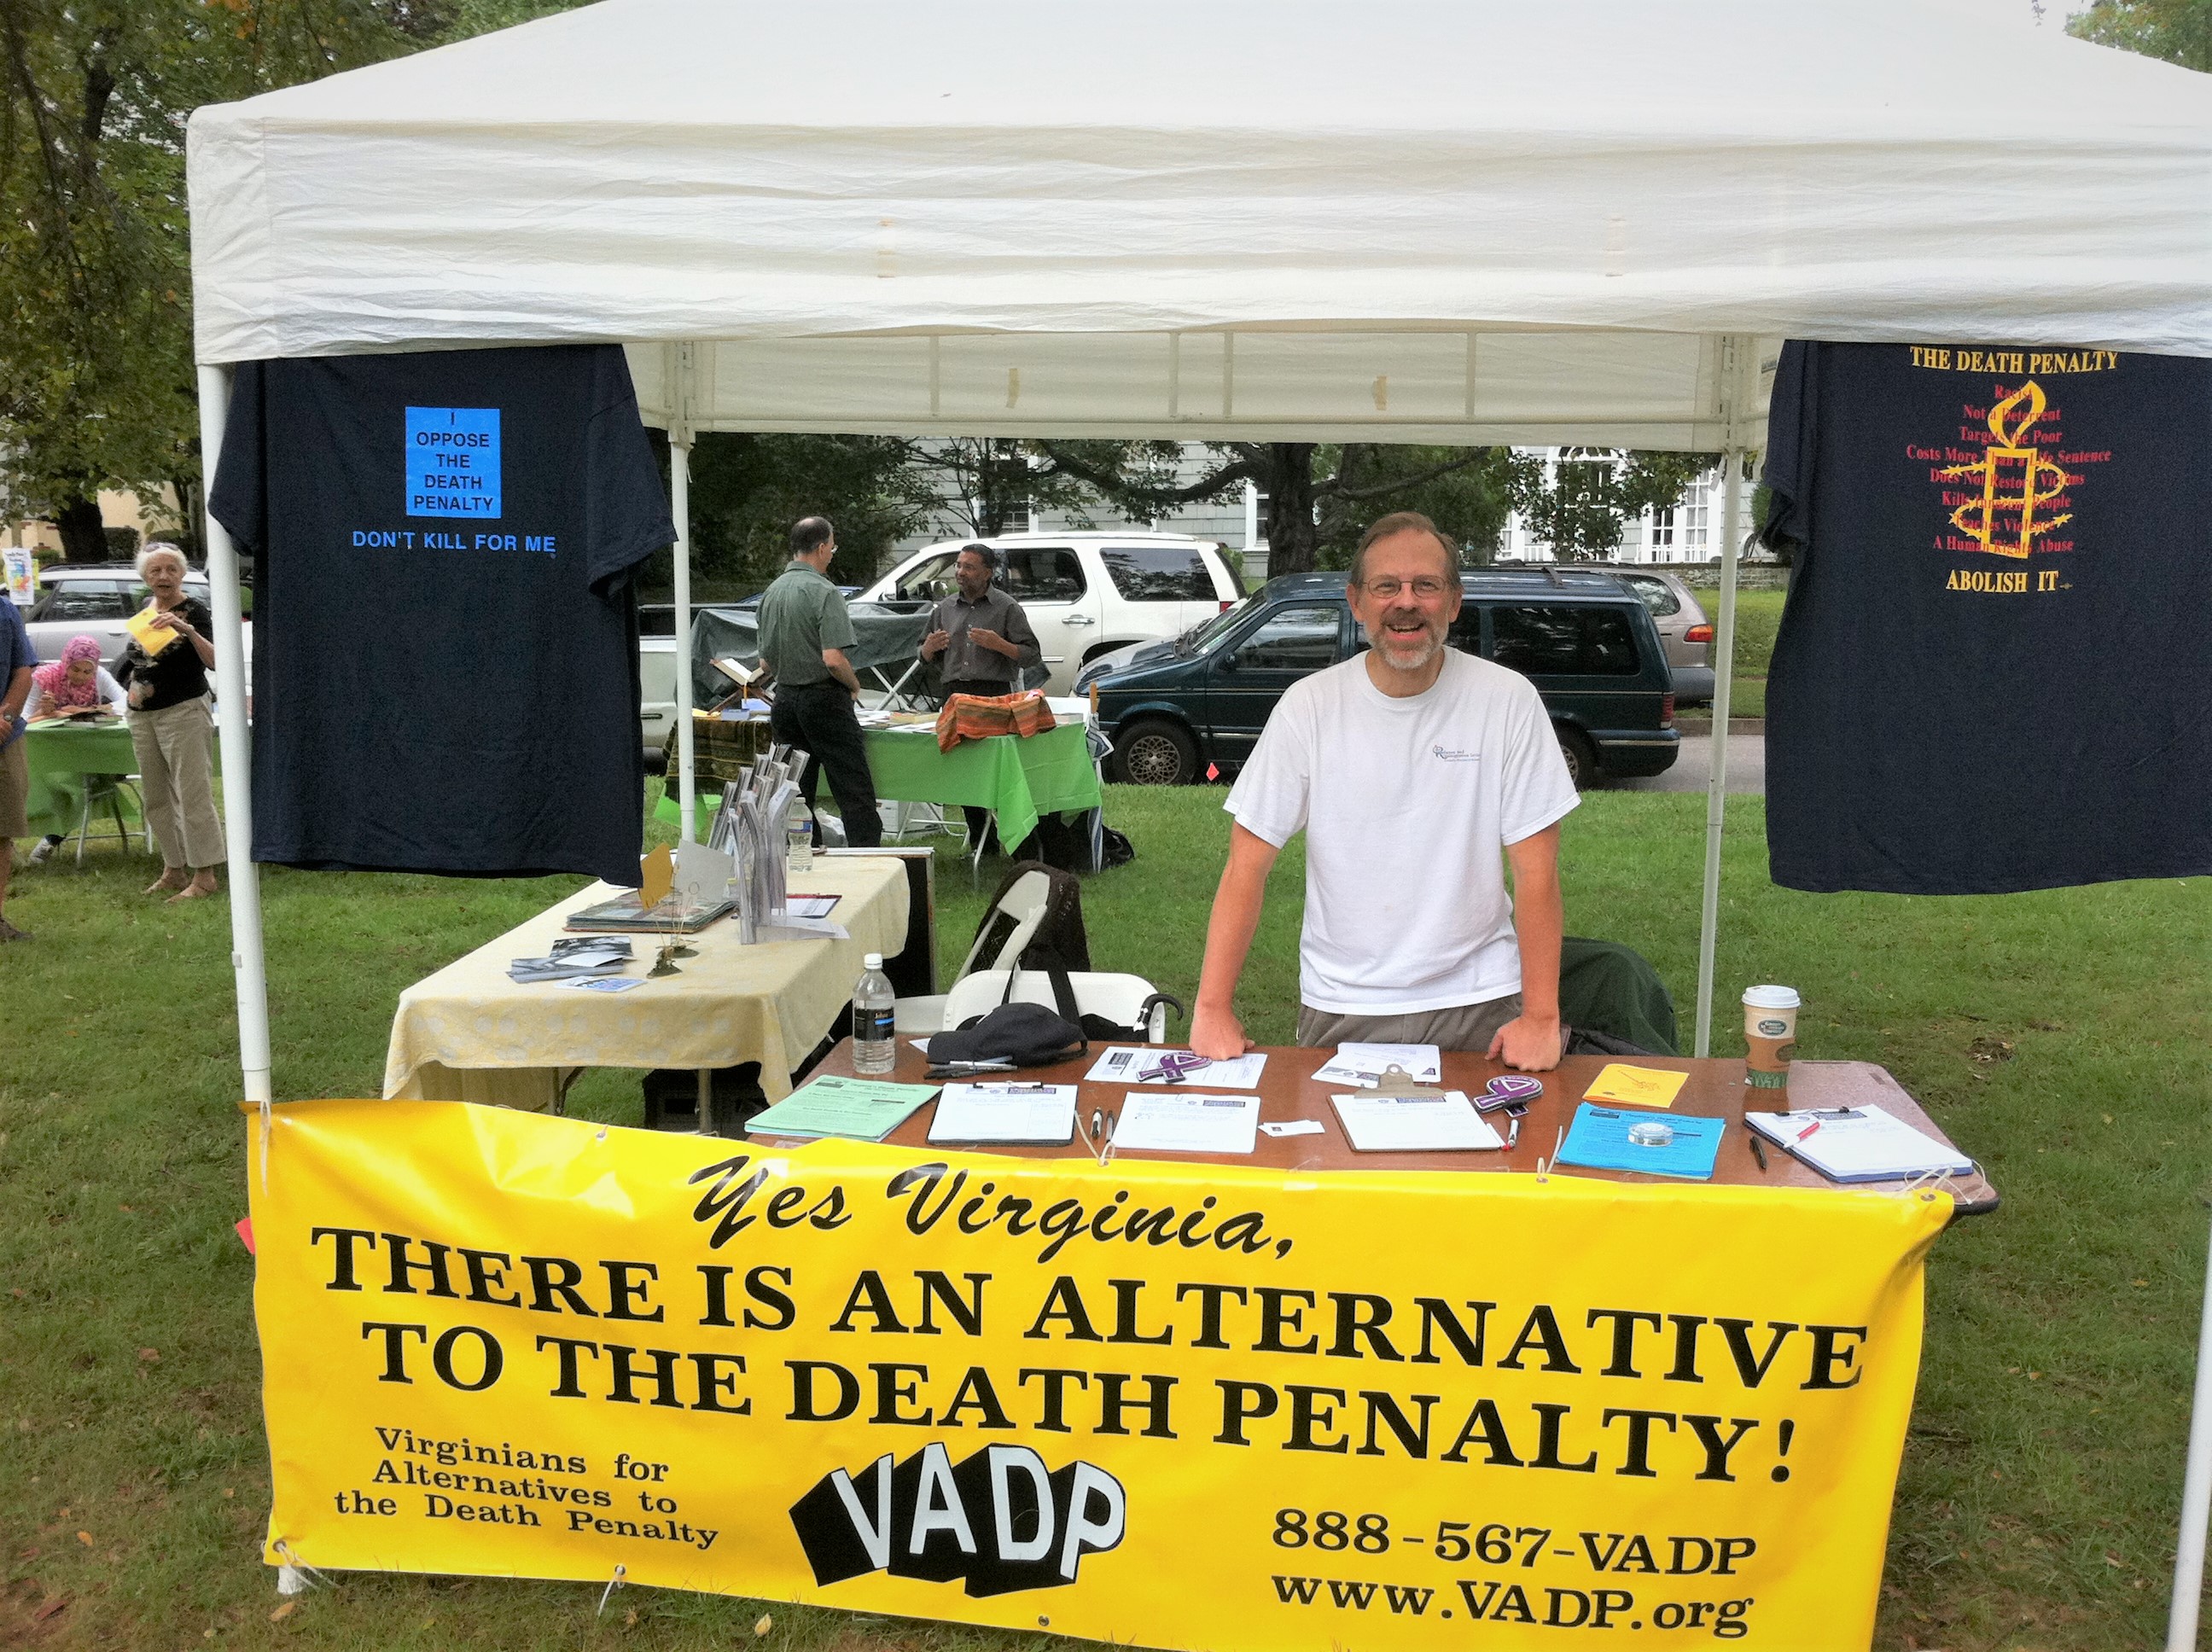 Michael Stone of the VADP stands in front of a campaign table